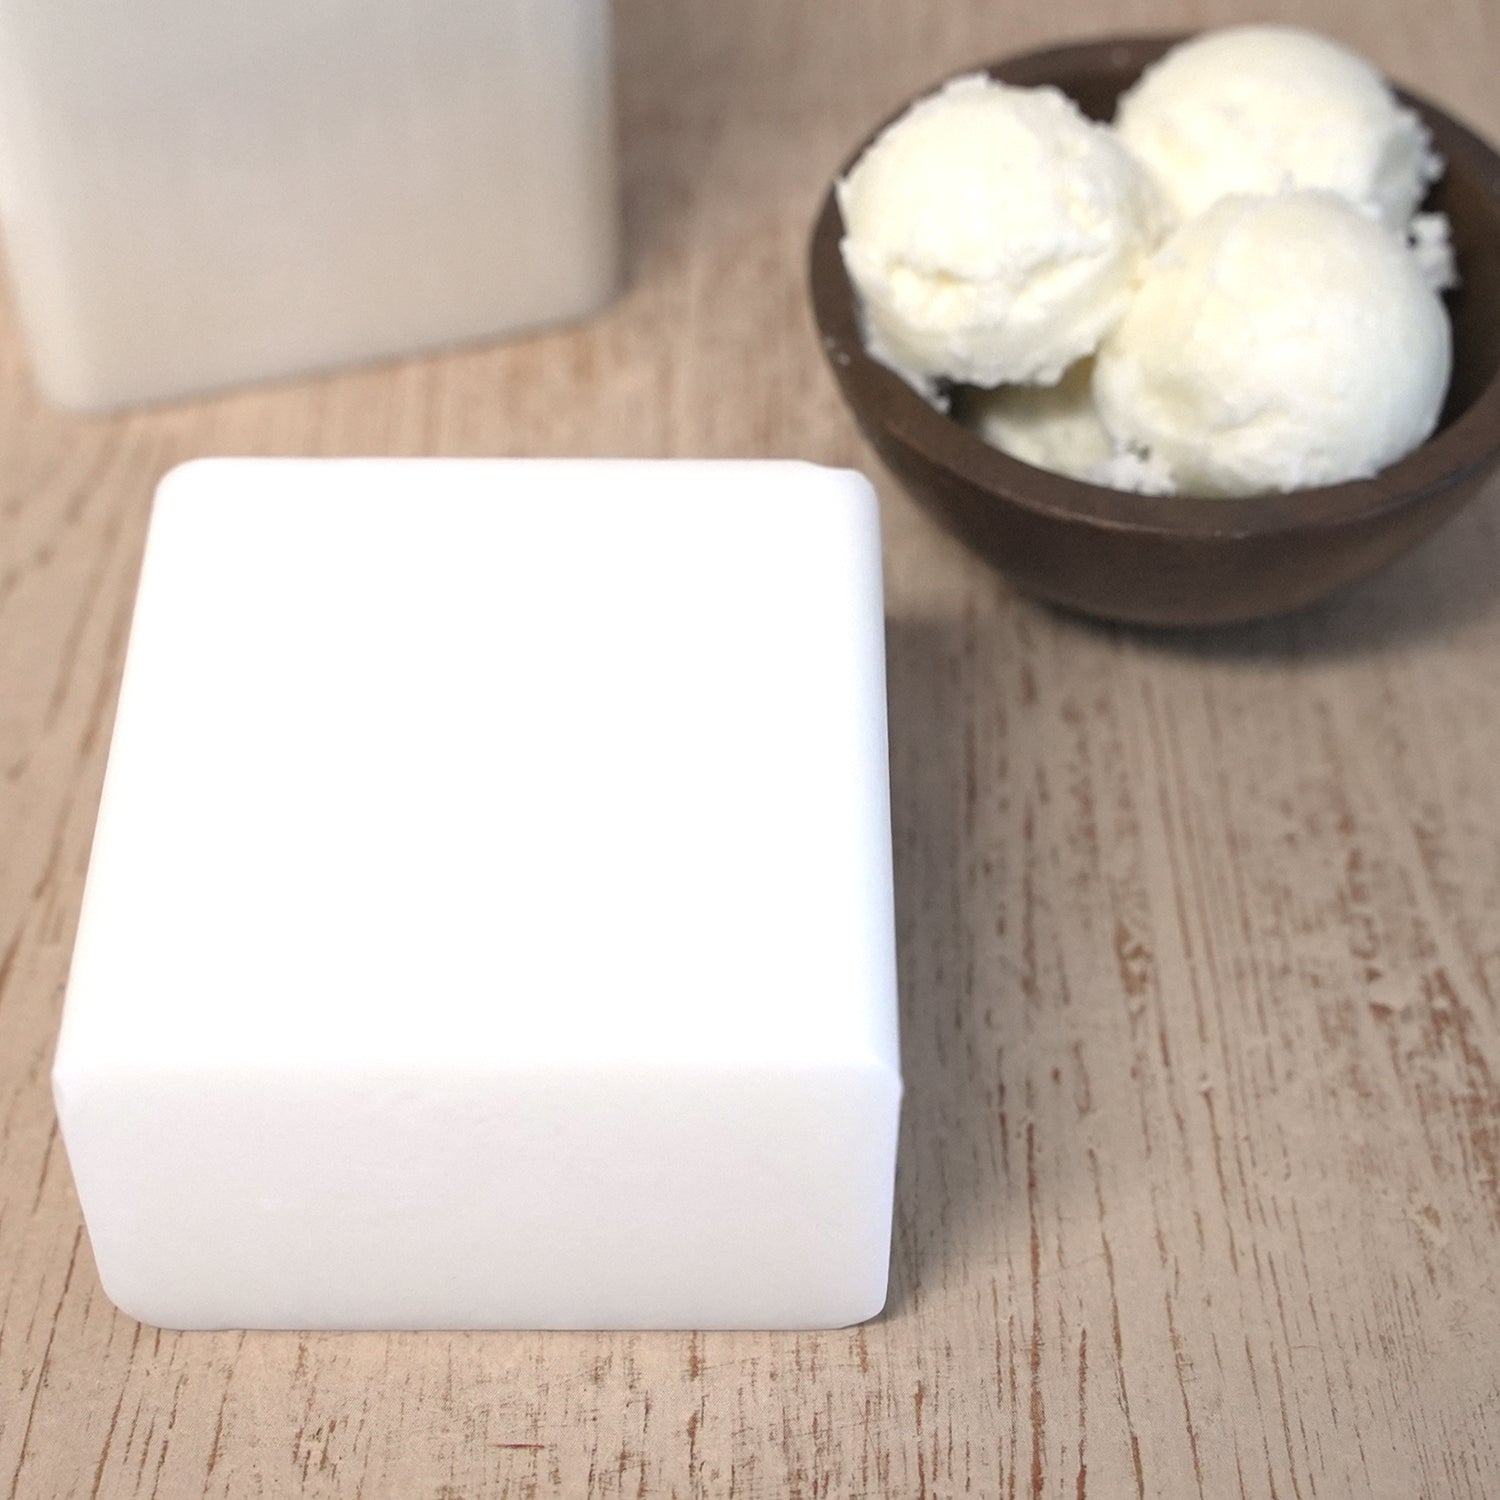 NATURAL Shea Butter Soap Base - 2lb Blocks for only $6.85 at Aztec Candle & Soap  Making Supplies